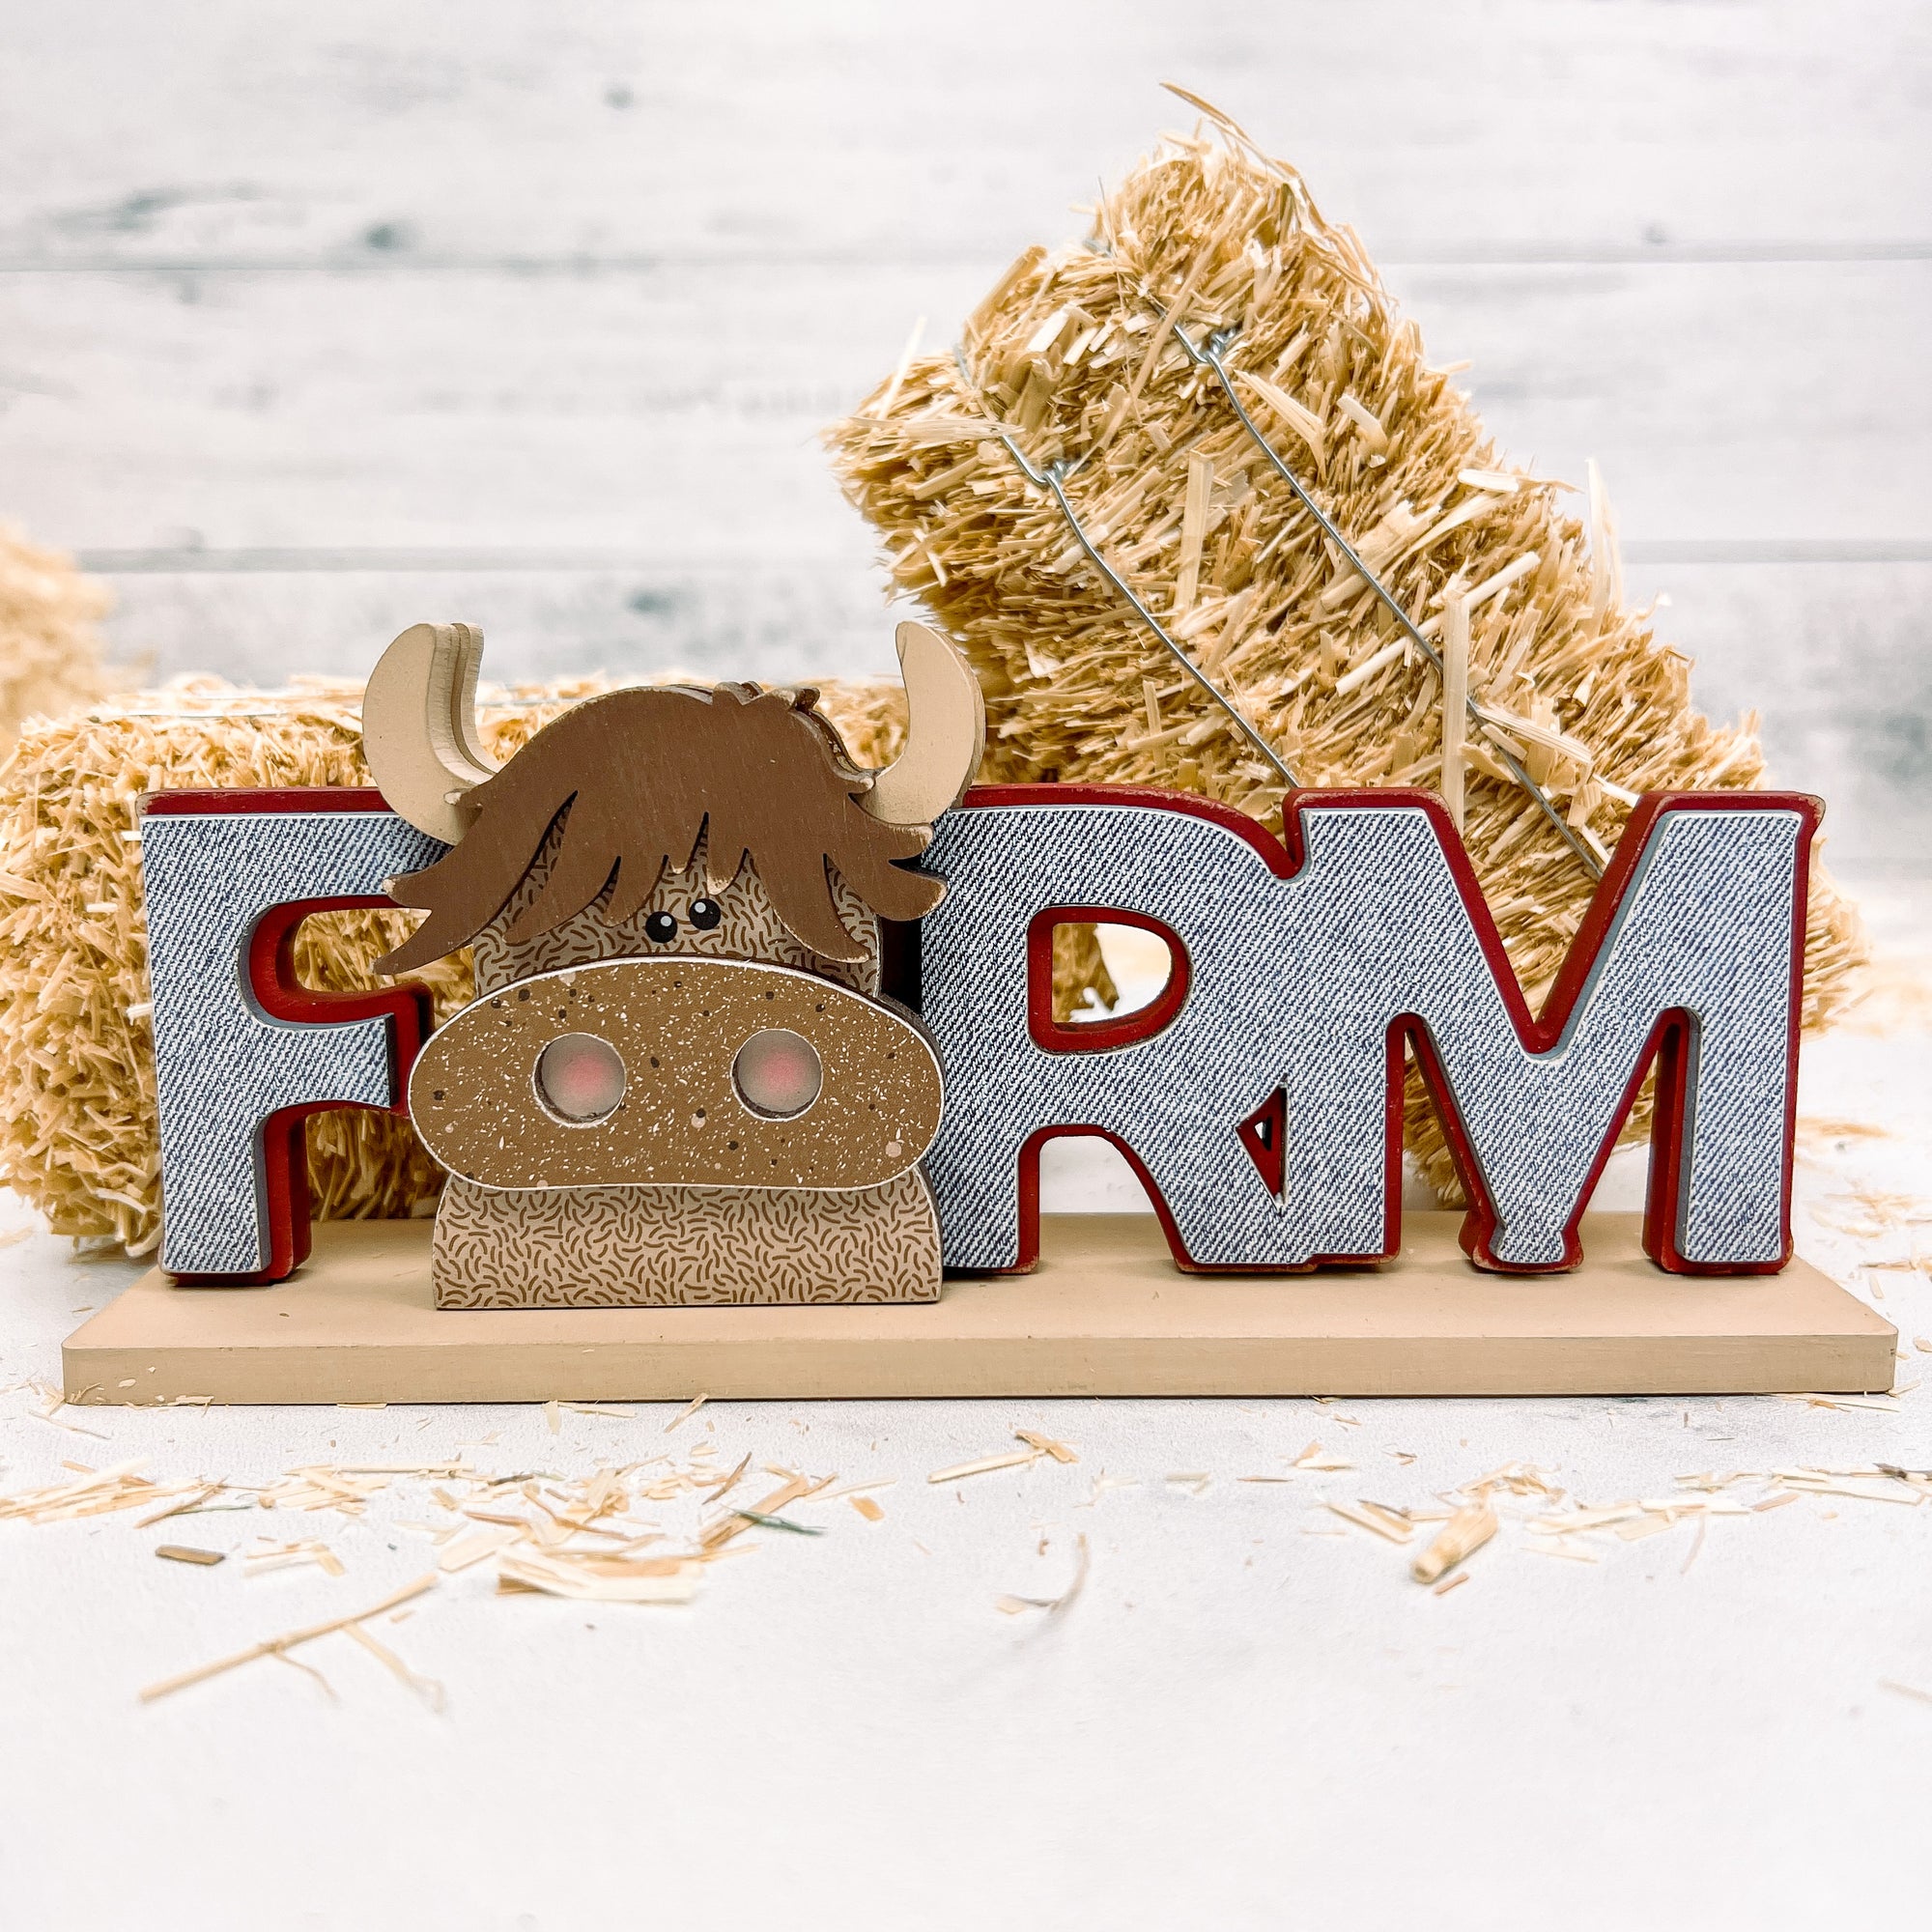 Farm word with a scruffy cow wood decor craft kit. Farm themed wood decoration for styling tiered trays, mantles, and shelves.